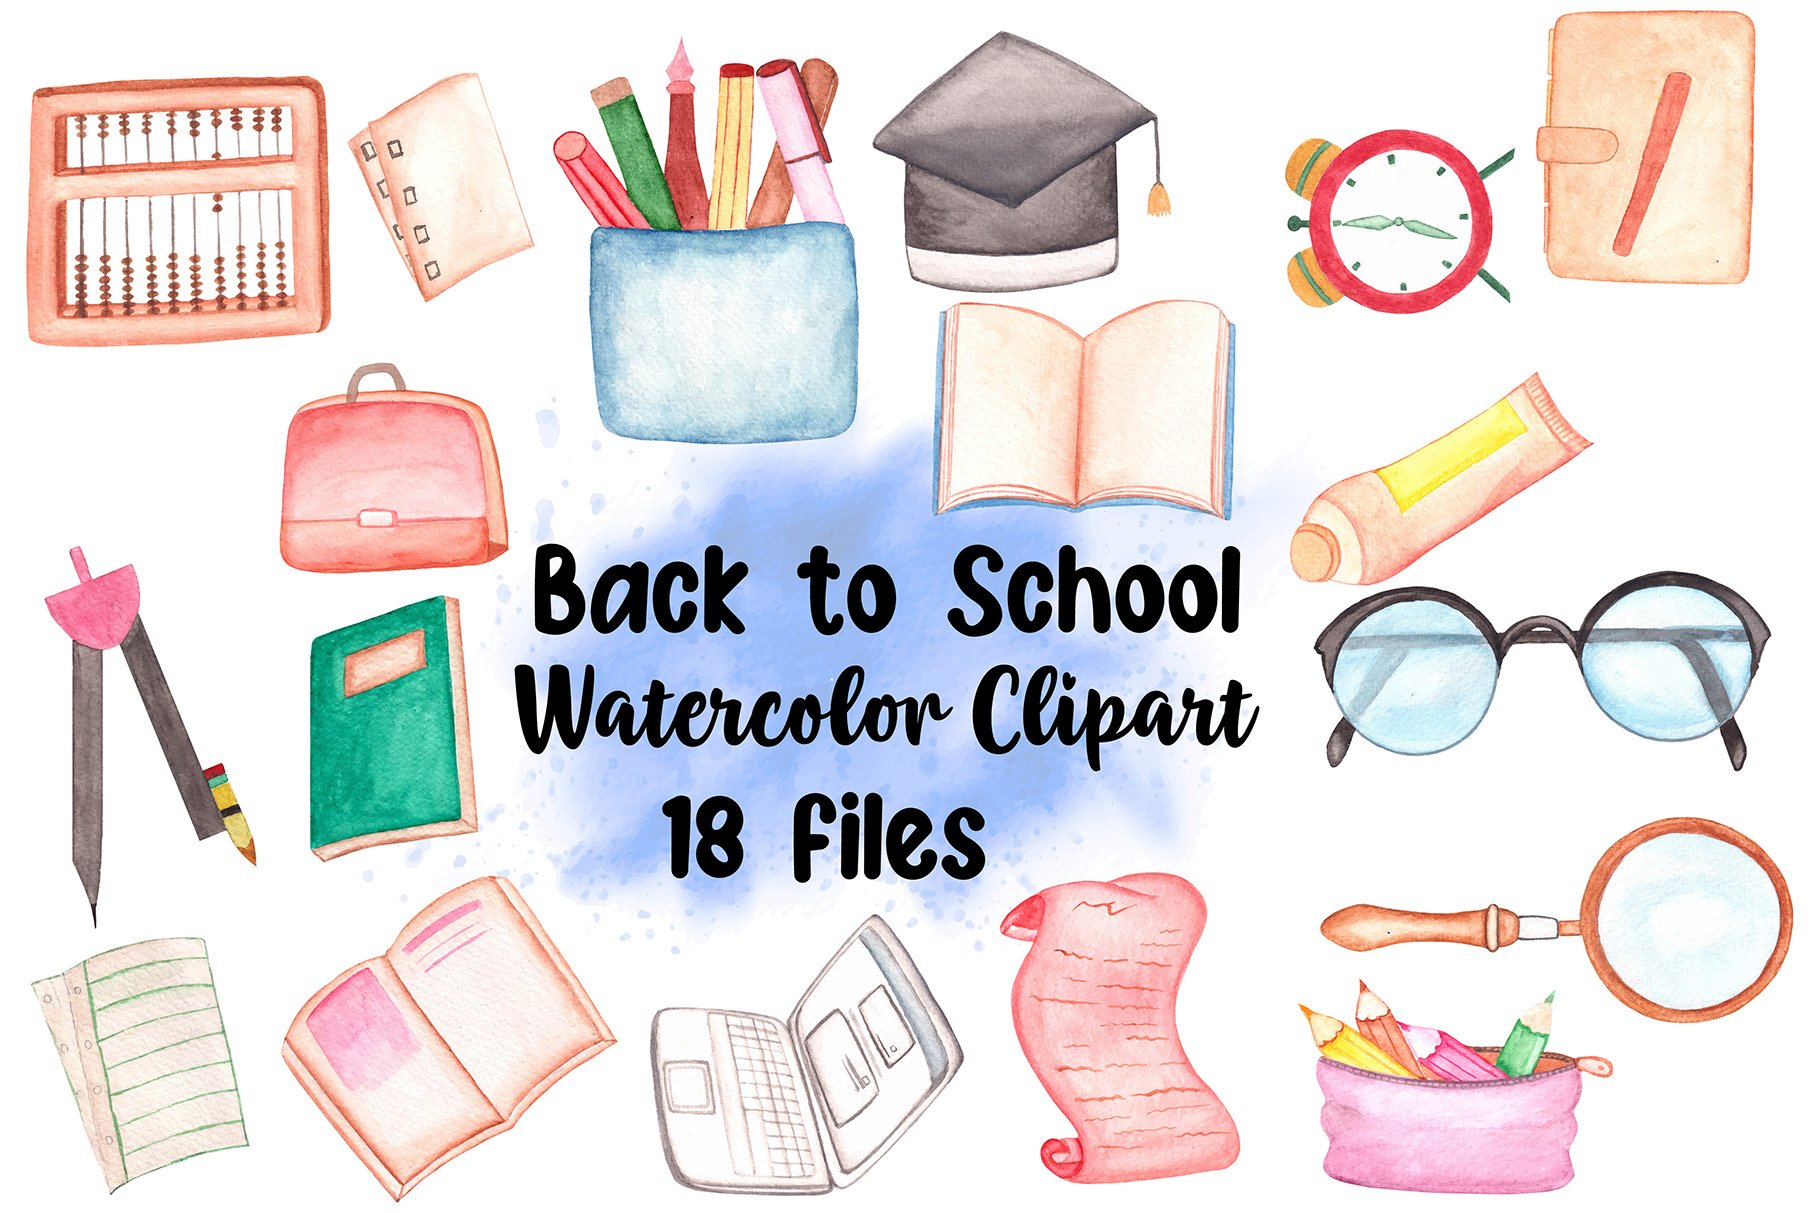 Watercolor Back to School Clipart cover image.